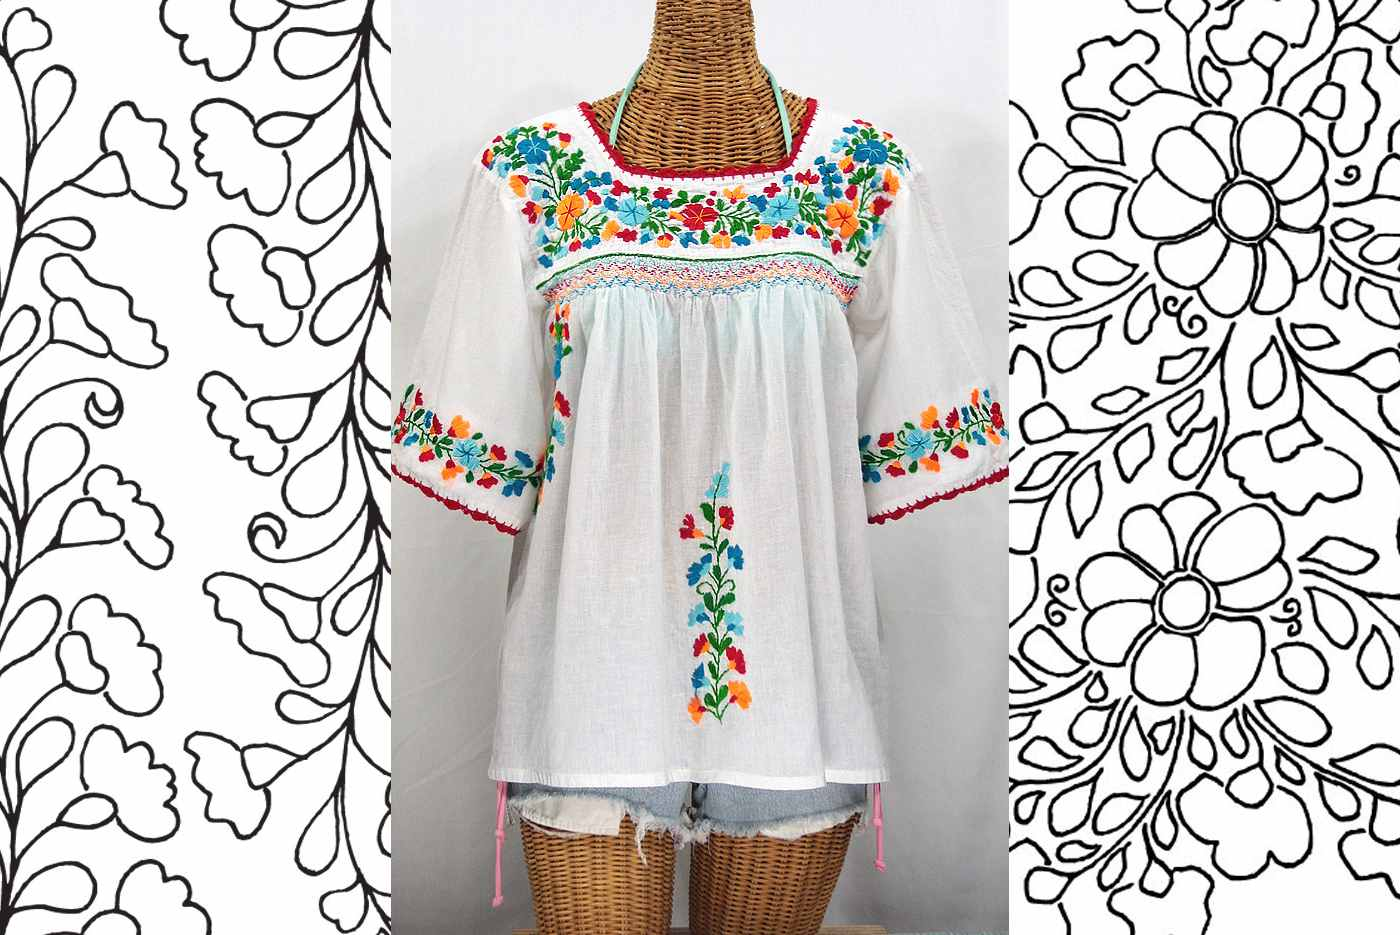 Mexican Flower Embroidery Patterns Ethnic And Multicultural Embroidery Patterns